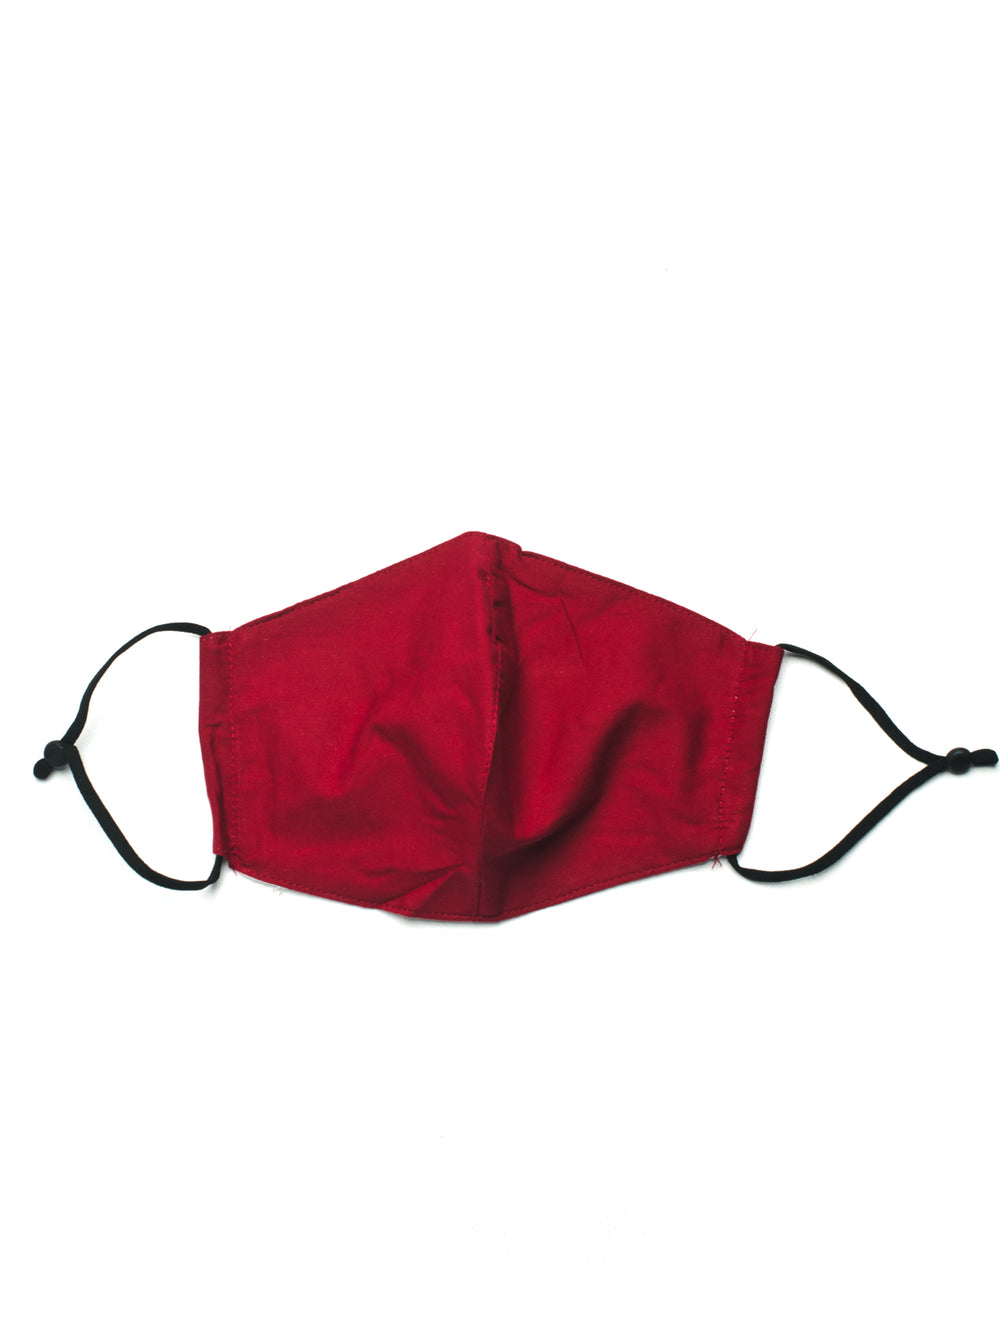 KW FASHION CORP SOLID MASK - BURGUNDY - CLEARANCE